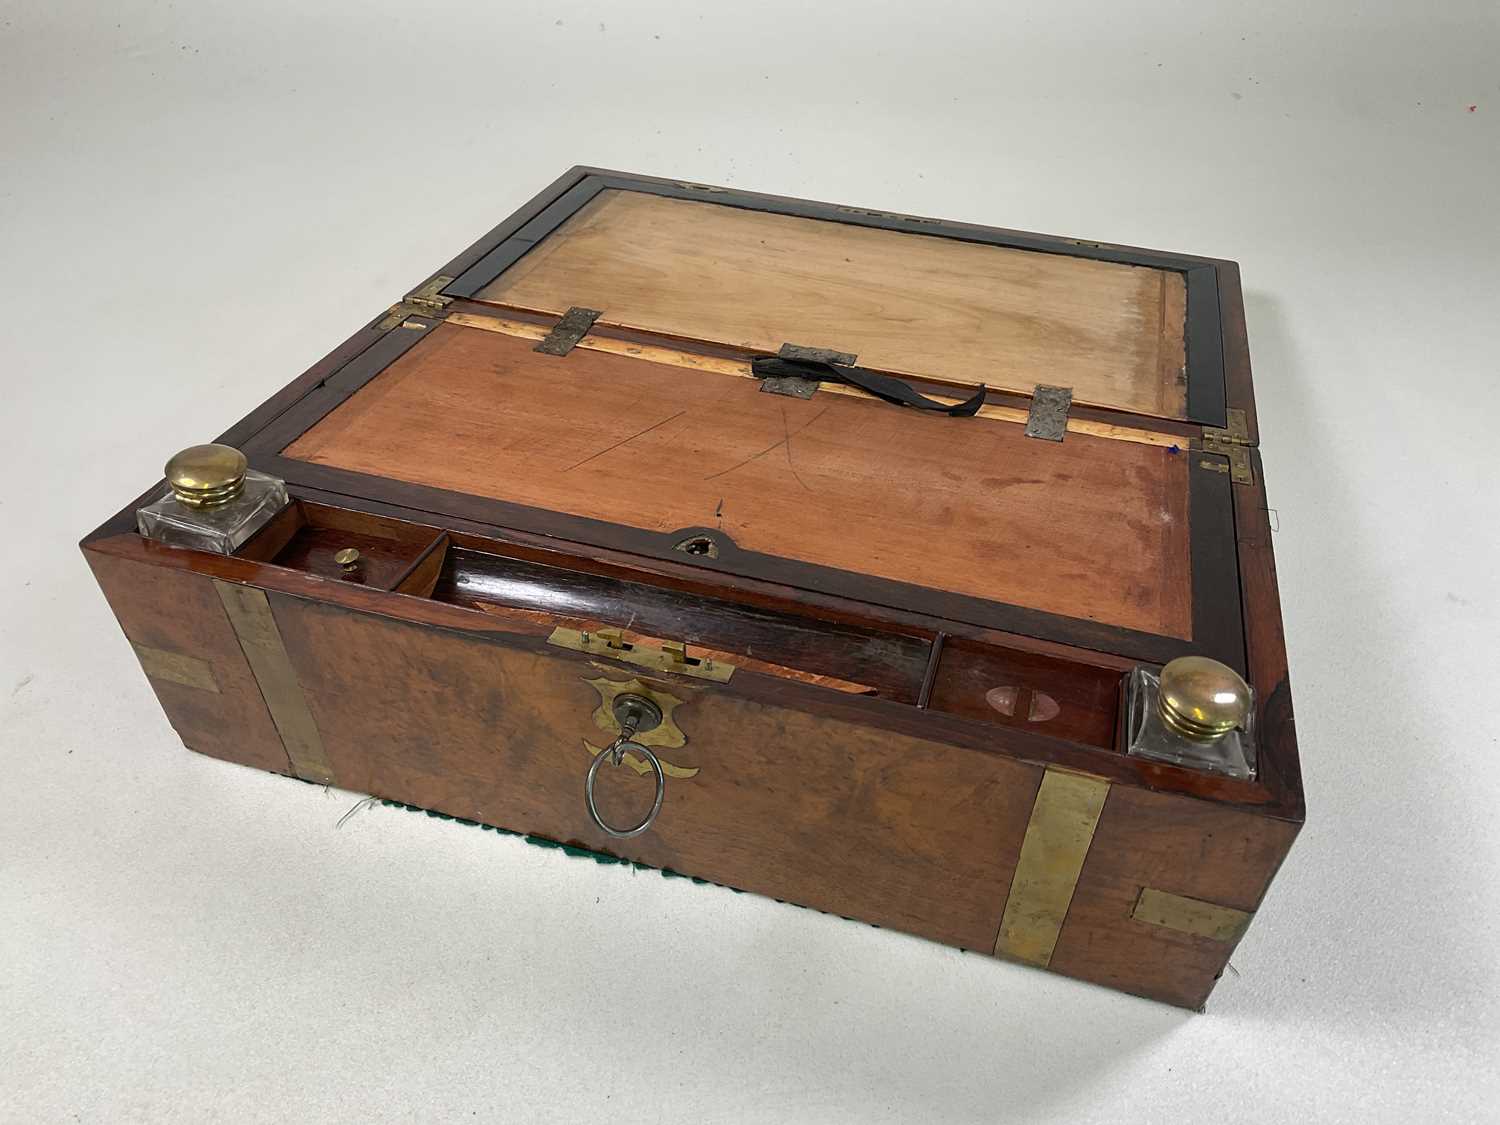 A burr walnut writing slope with brass strapping and corners, brass topped inkwells, escutcheons and